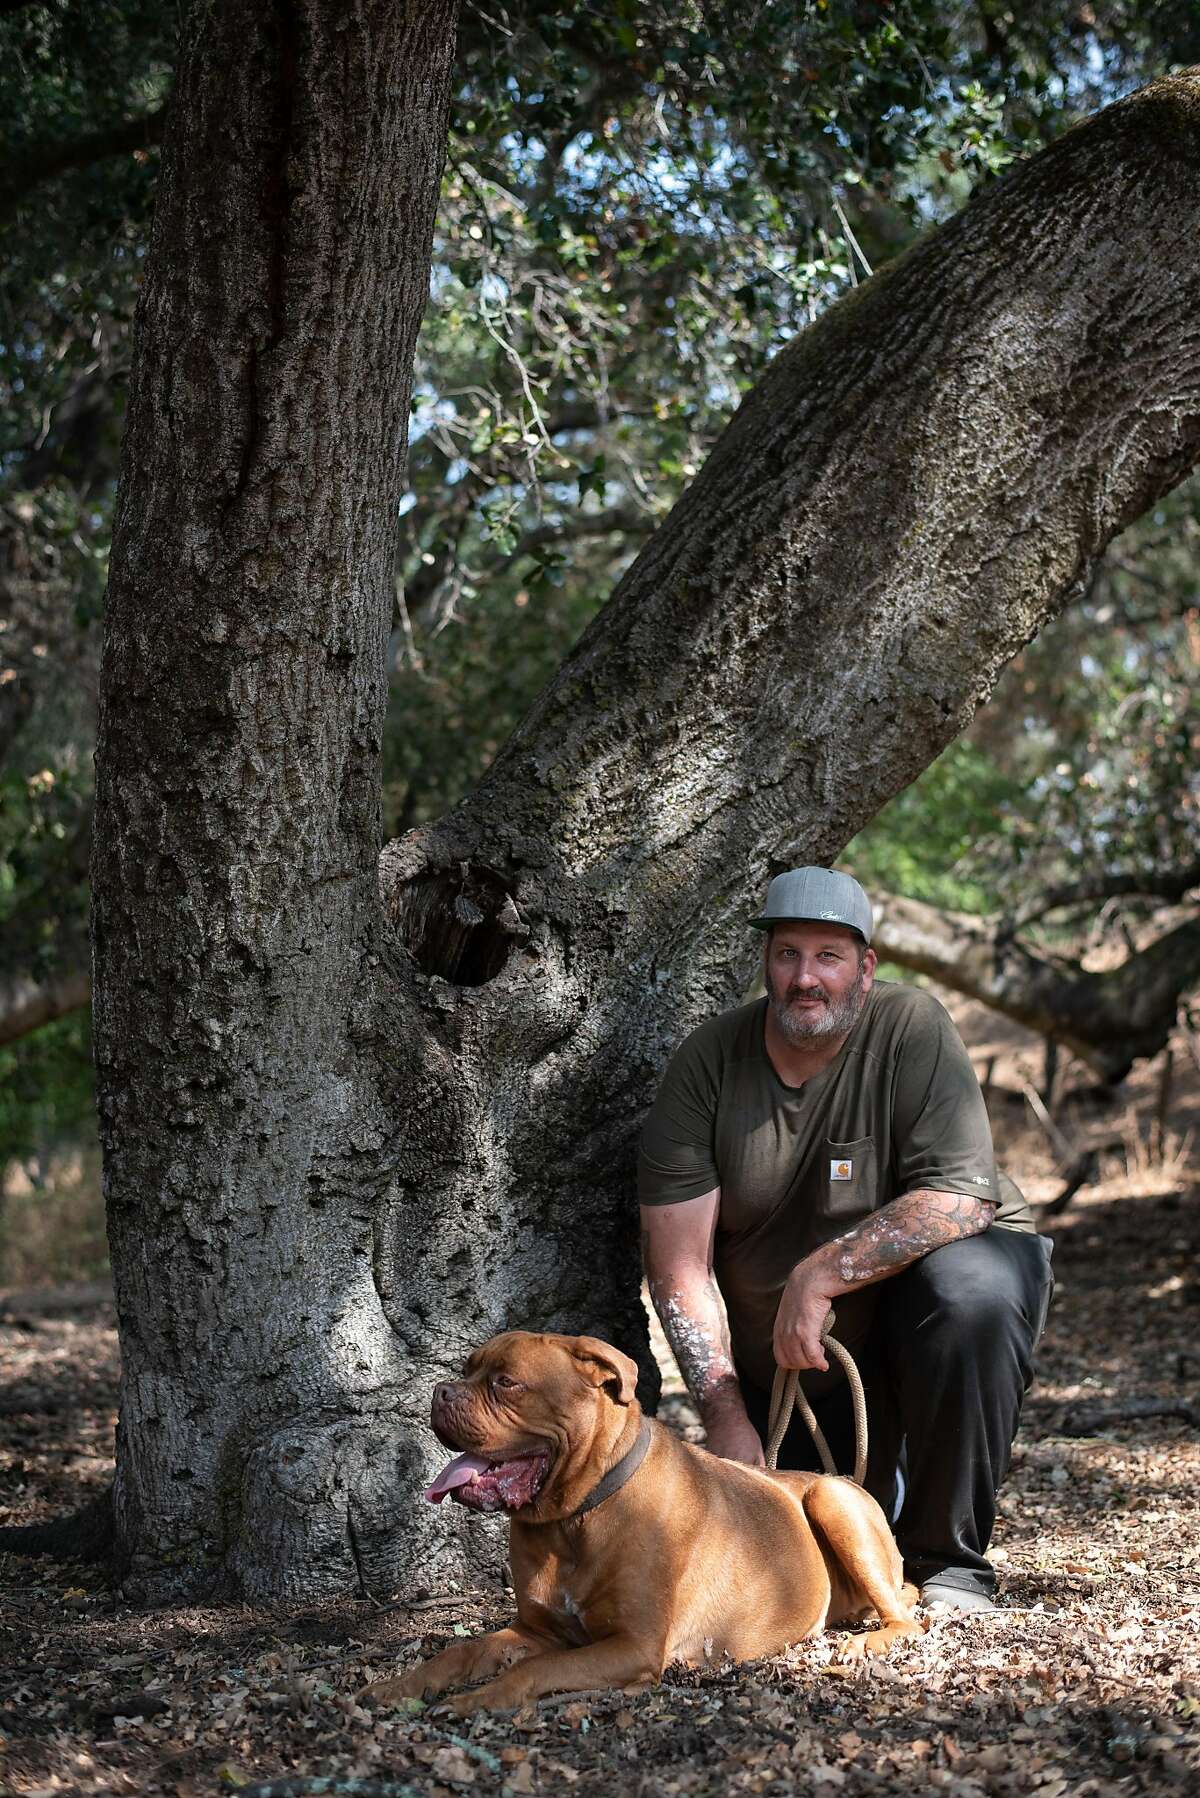 Chris Woolf poses with his 4-year-old mastiff Sir Anthony Brutus Brewcephus II (BruTwo for short) in San Martin on Sept. 17, 2020. Woolf, a former Navy medic and Burning man ranger, waited until the last possible moment to pack up his truck and evacuate his home in Butte County after the North Complex Fire swept through the area. He does not know if his house has survived.